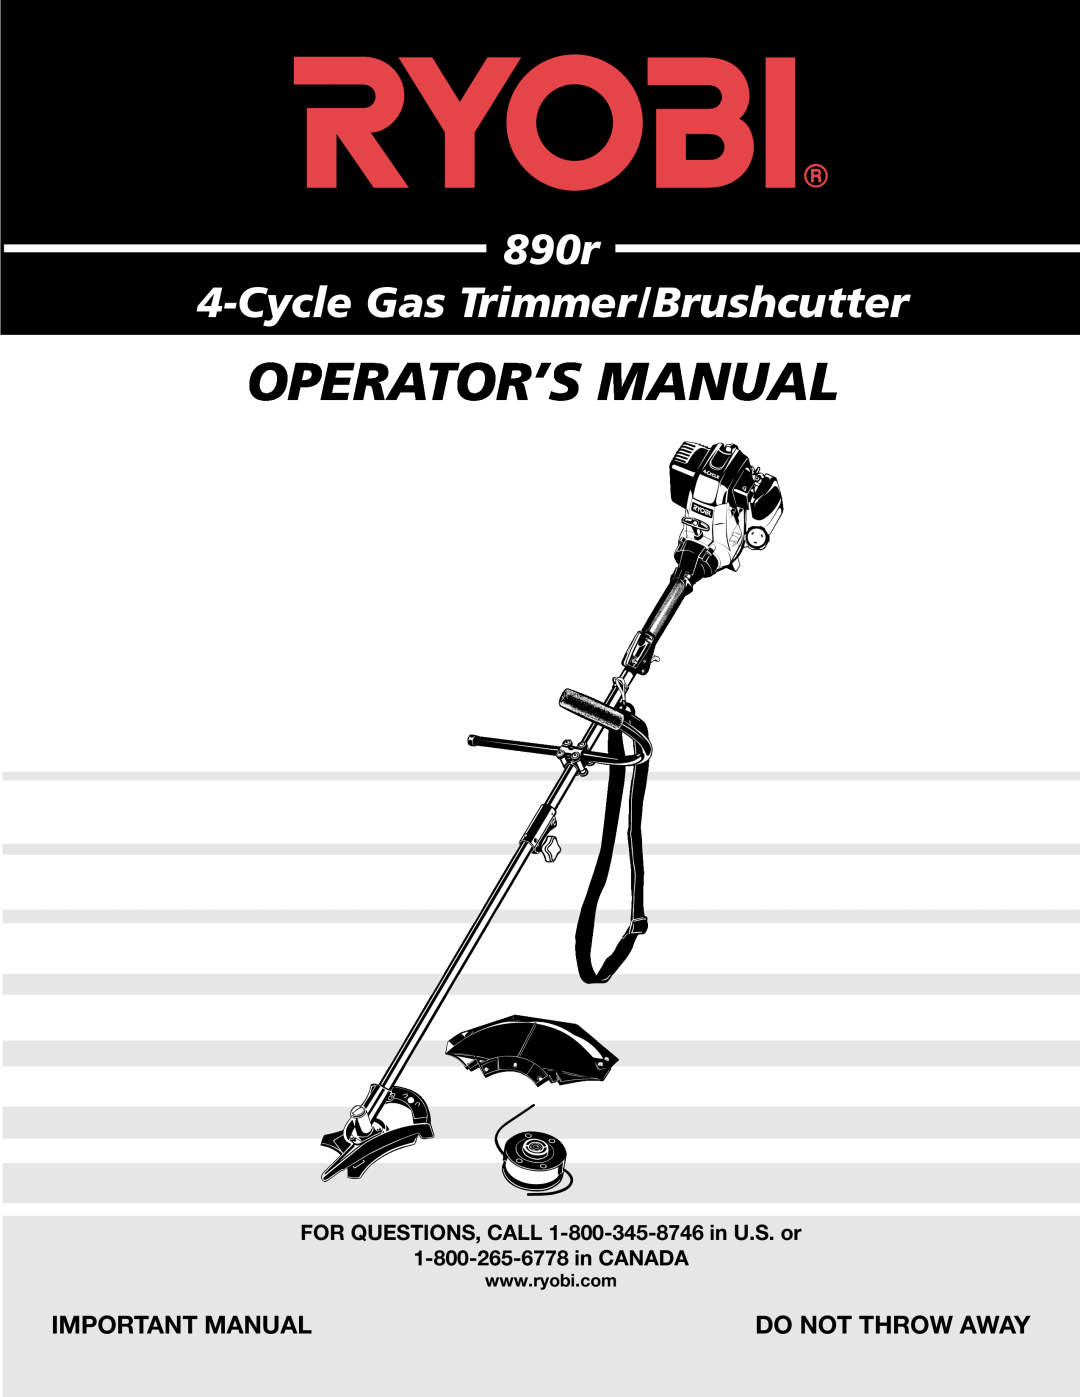 Ryobi 890r manual Important Manual, FOR QUESTIONS, CALL 1-800-345-8746 in U.S. or, Operator’S Manual, Do Not Throw Away 